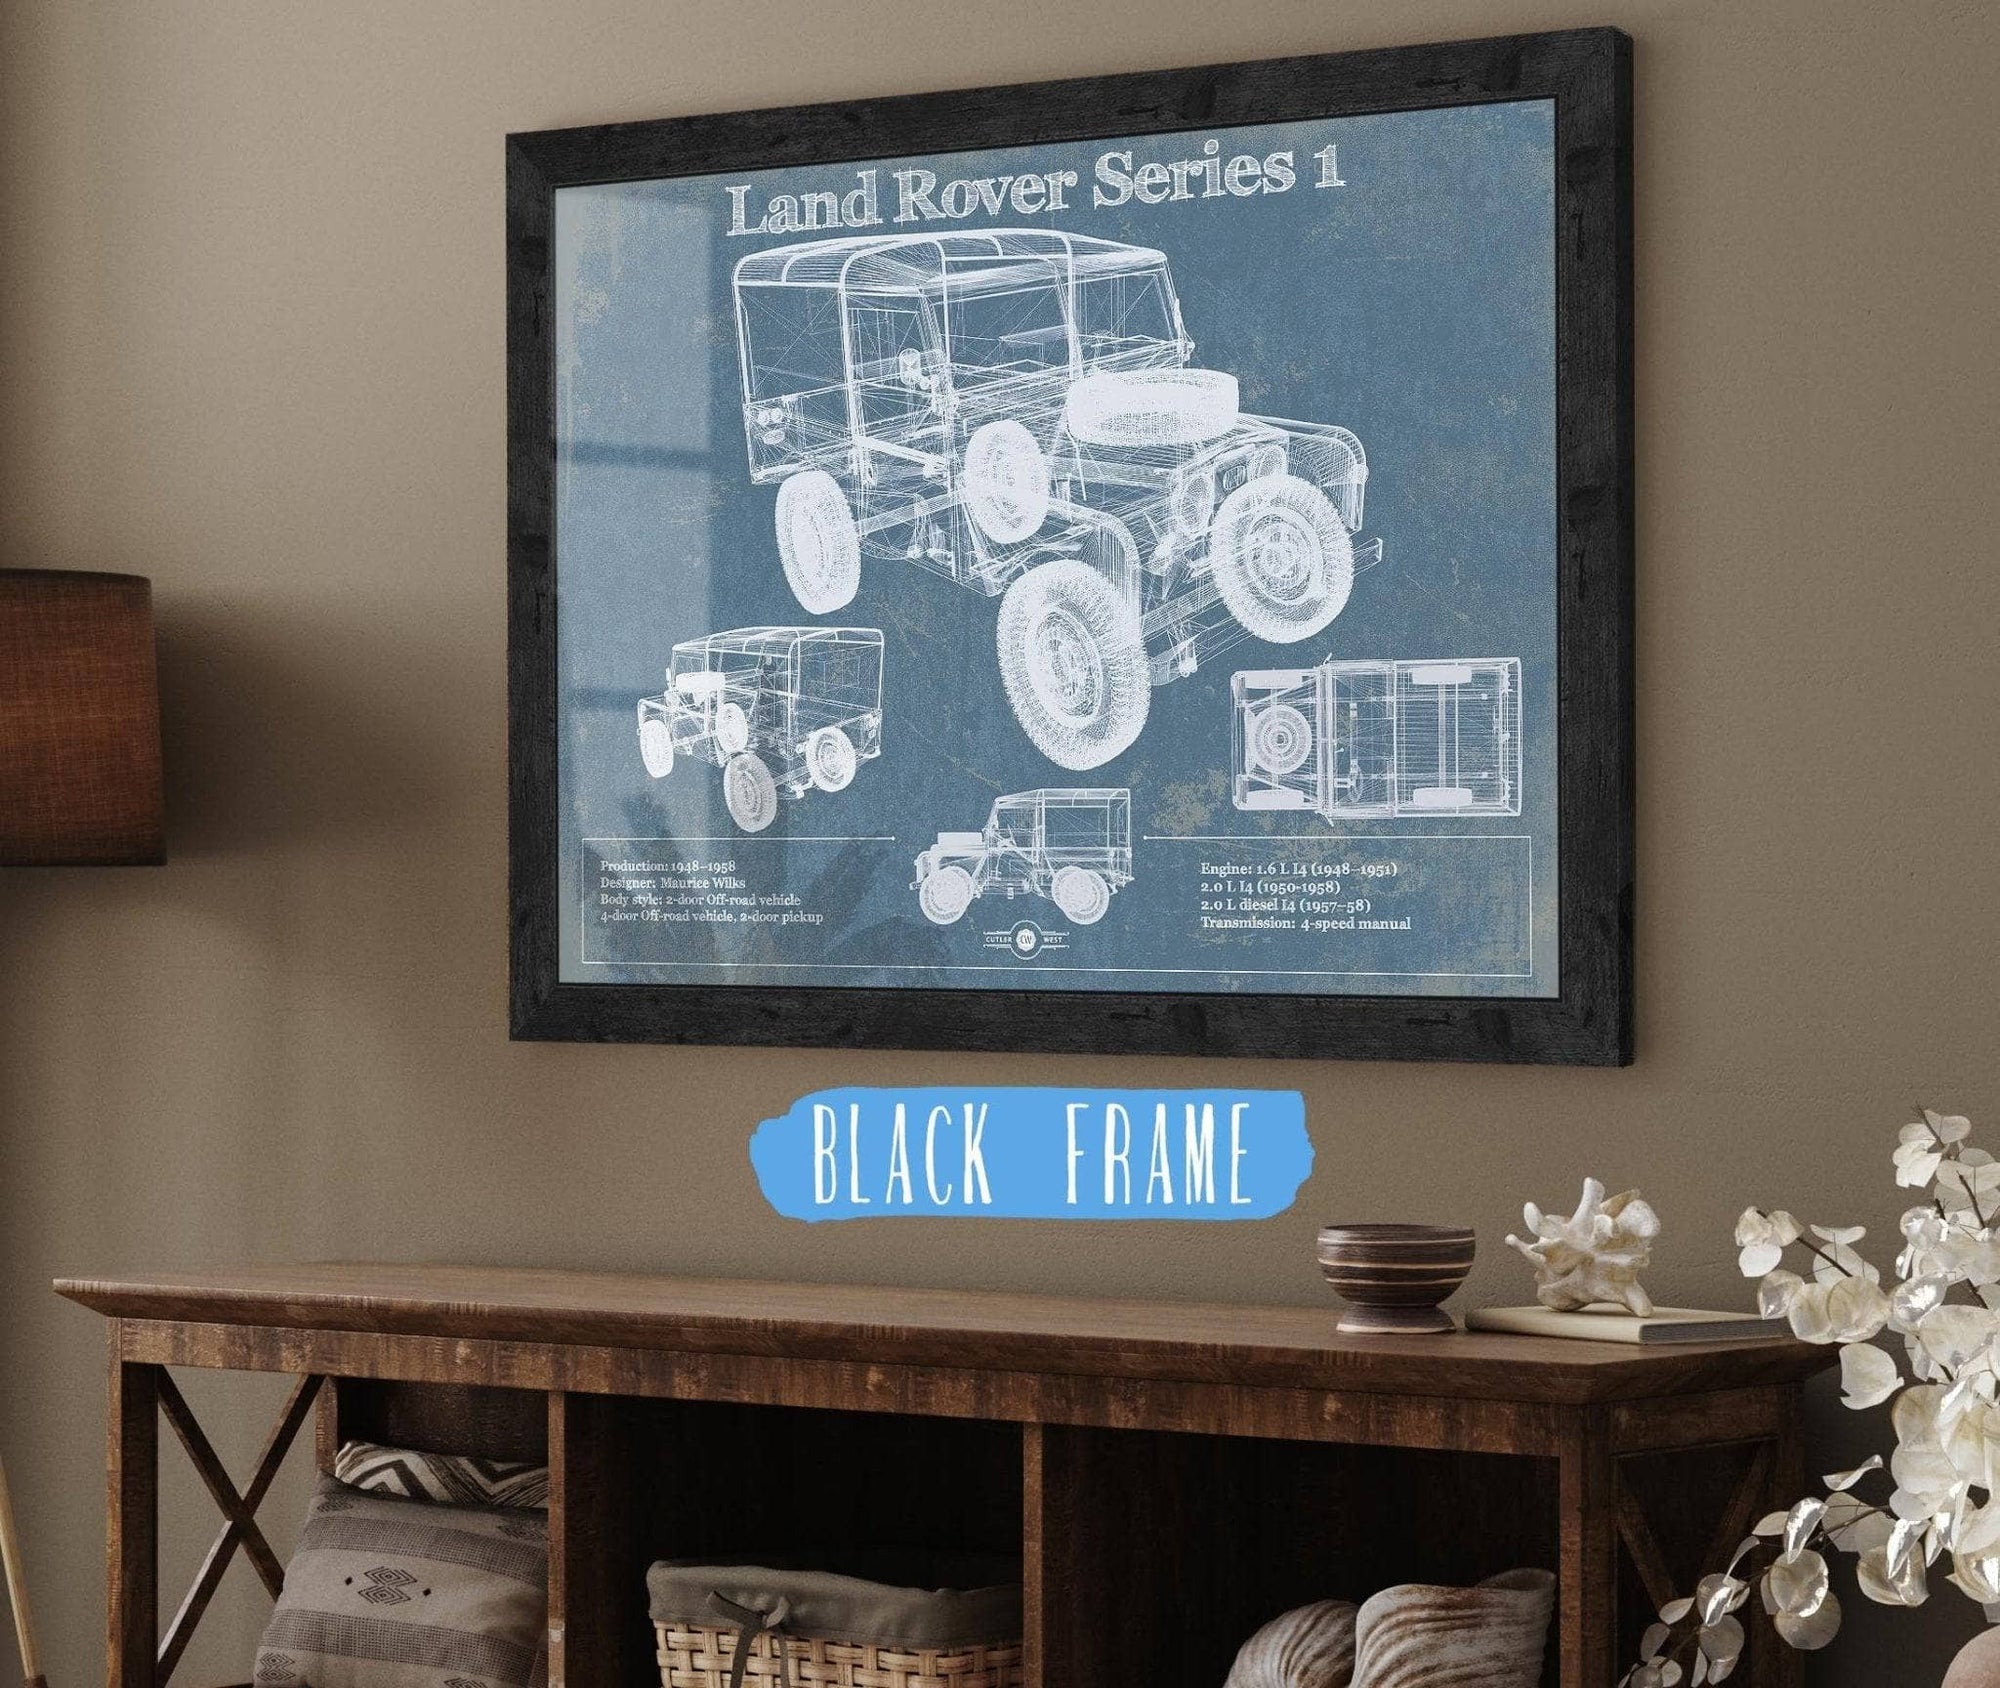 Cutler West Land Rover Collection 14" x 11" / Black Frame Land Rover Series 1 Blueprint Vintage Auto Patent Print 814256170_65567